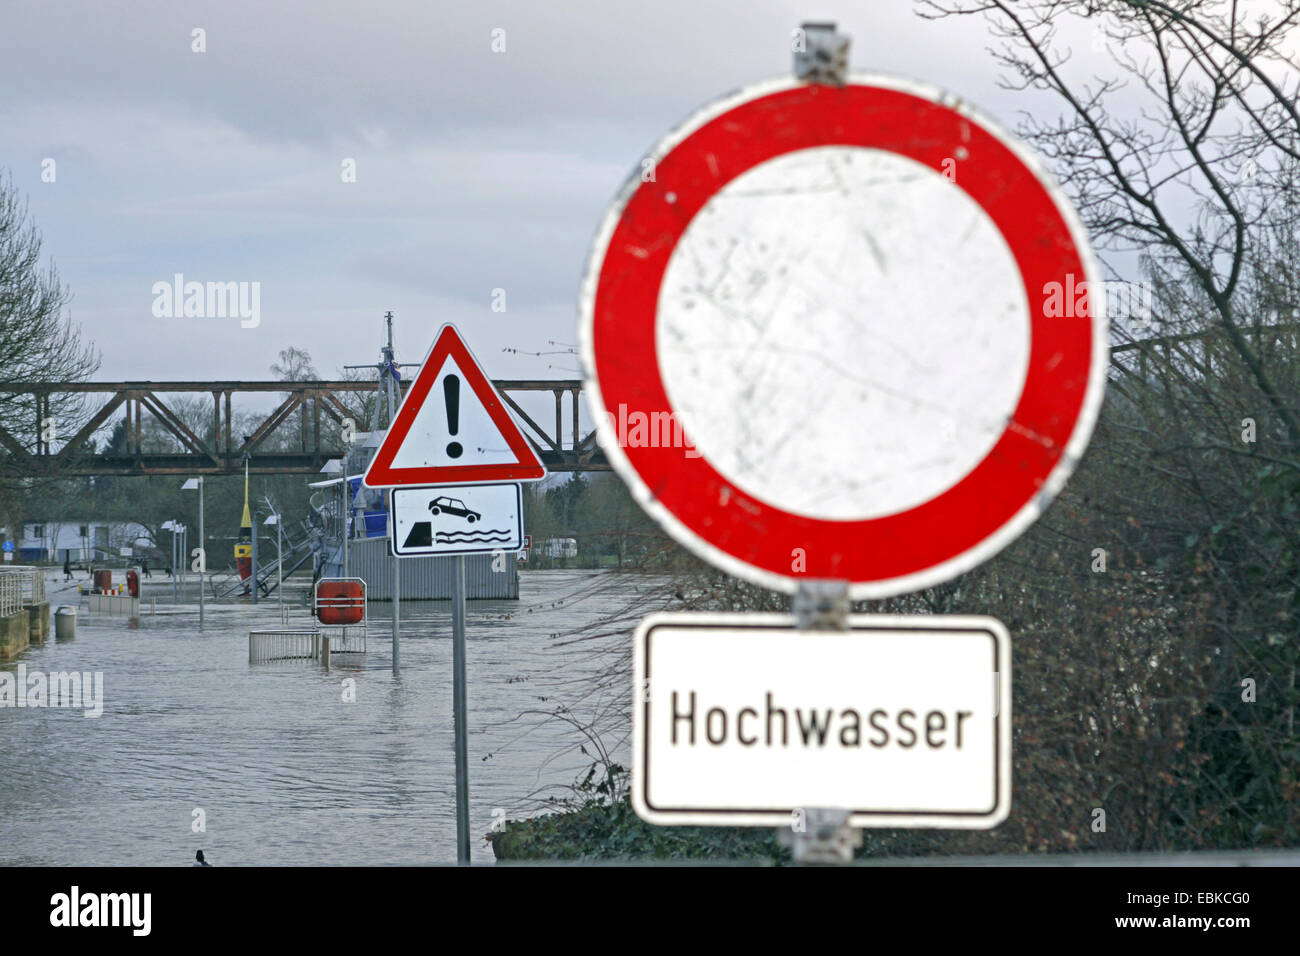 high water of Weser river, 'no through traffic' sign at river bank, Germany Stock Photo